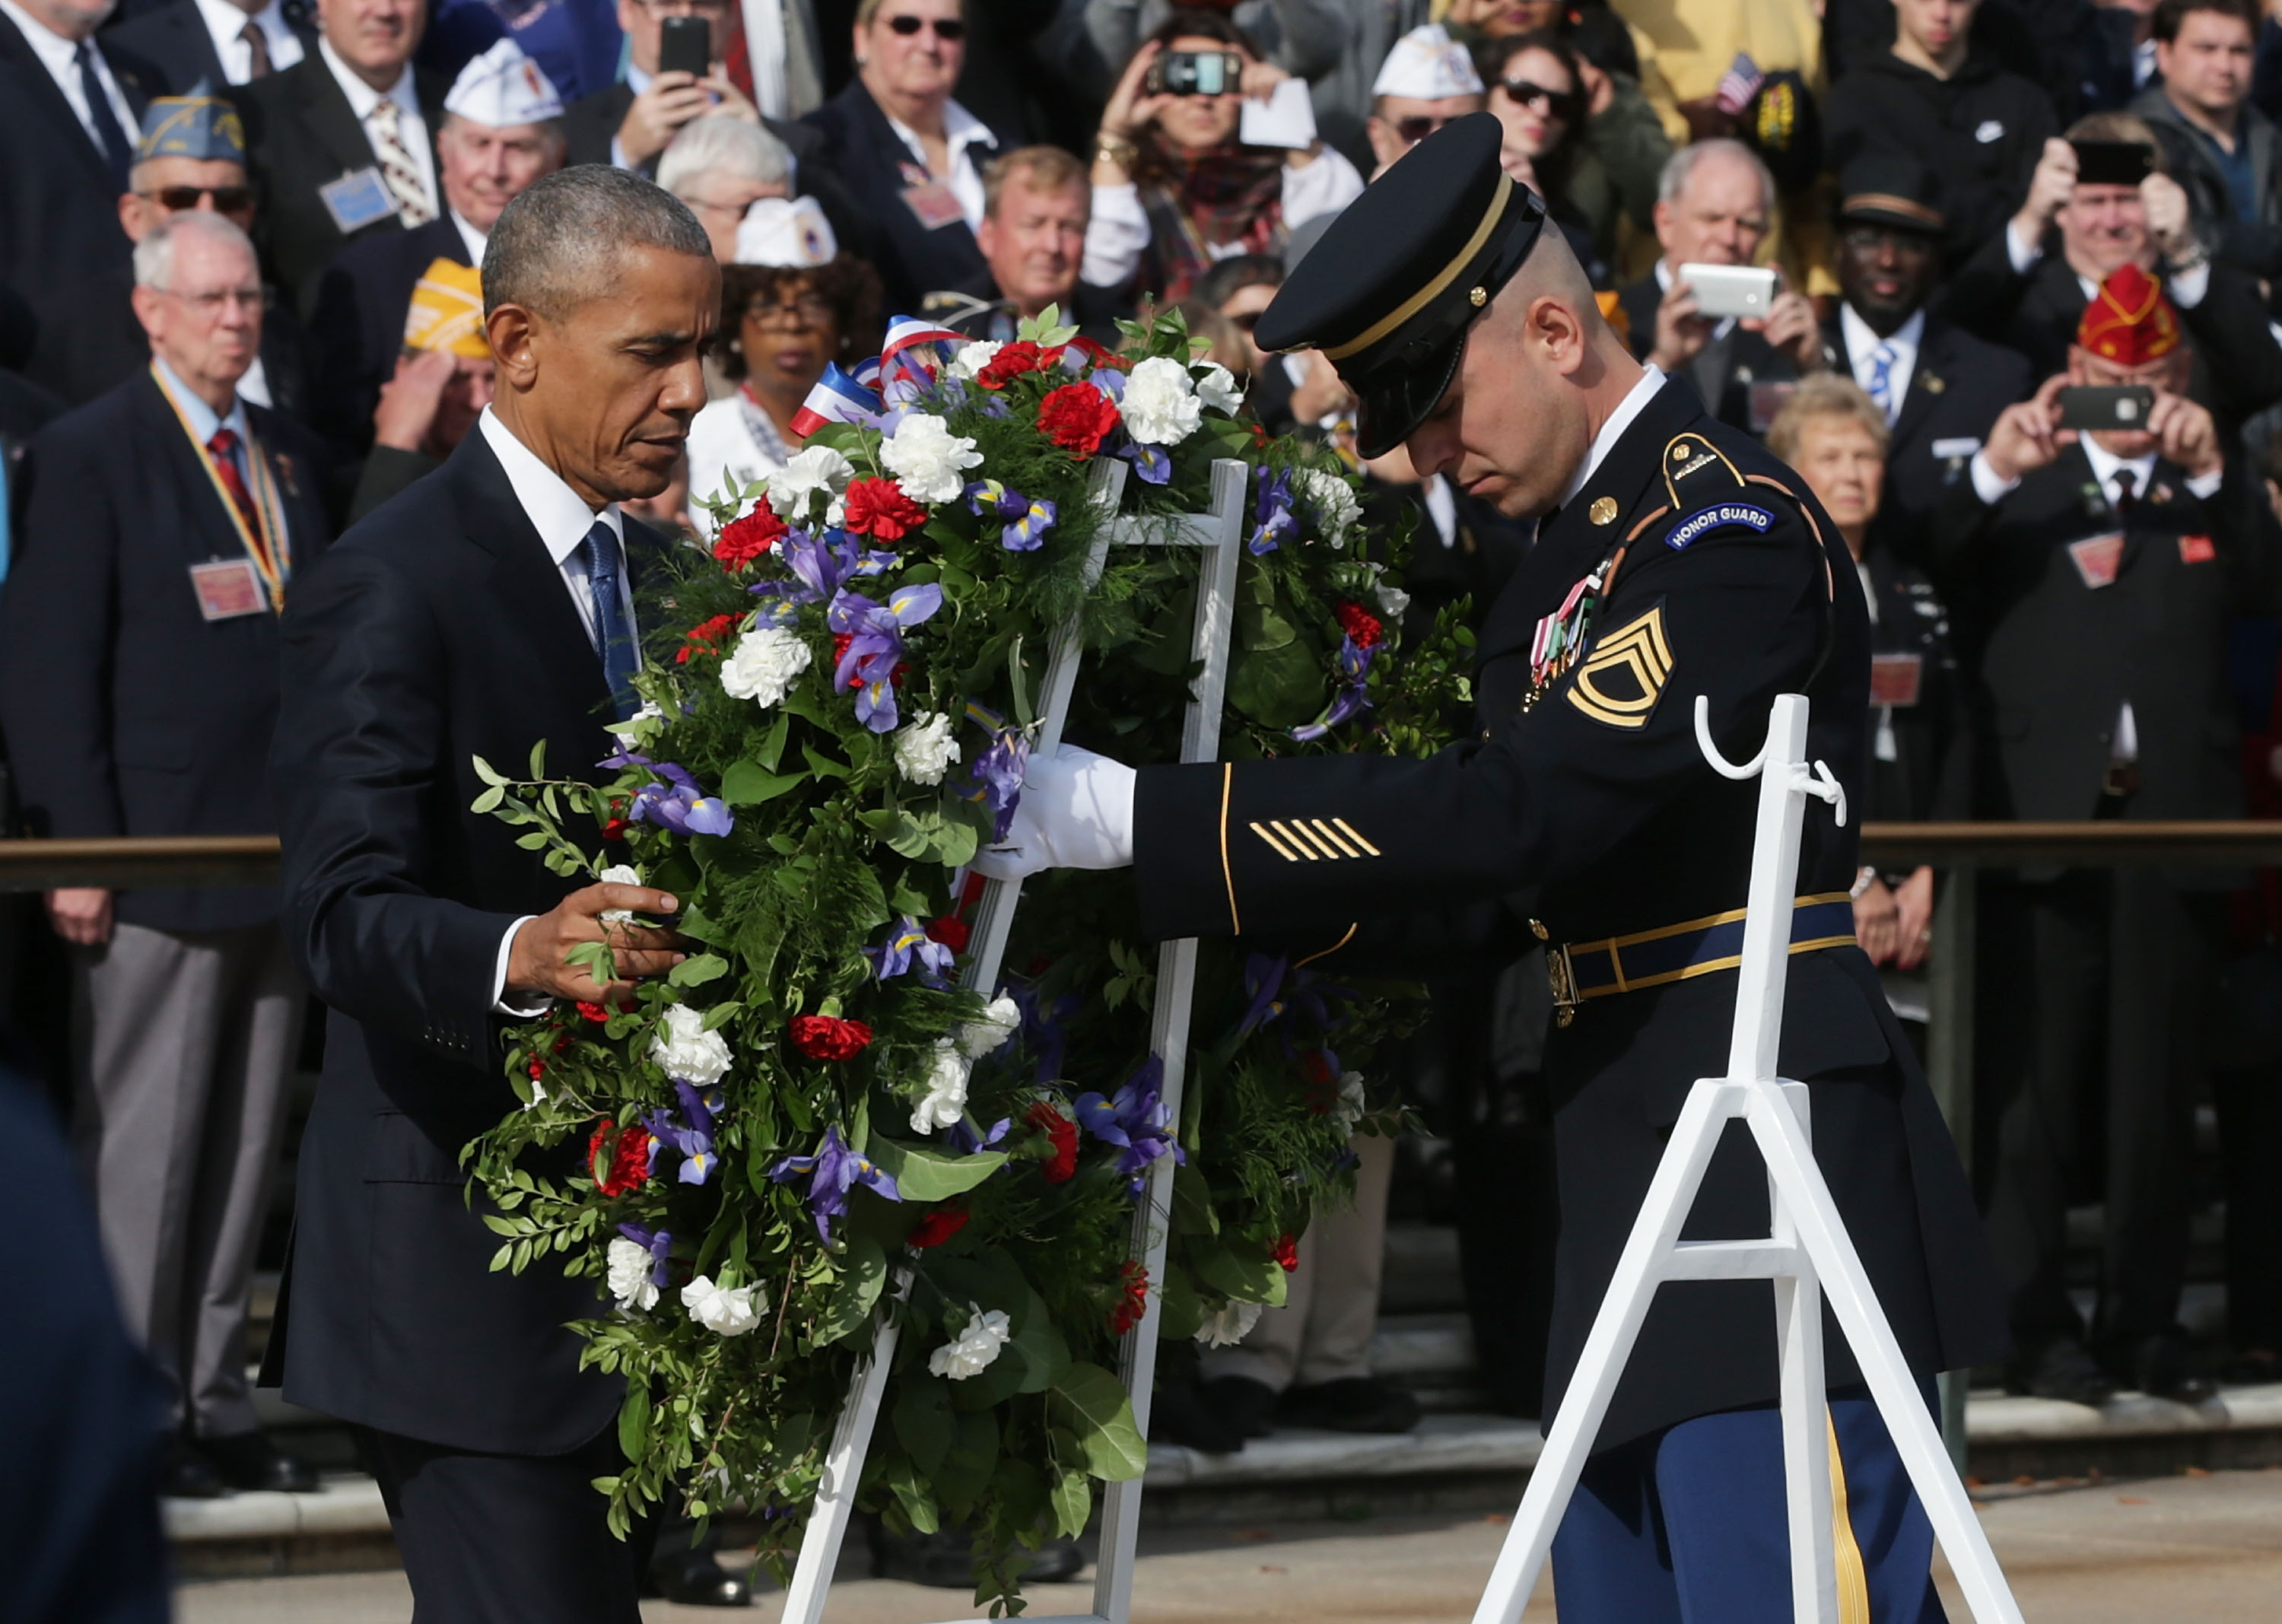 President Obama Lays Wreath At Tomb Of Unknown Soldier On Veterans Day